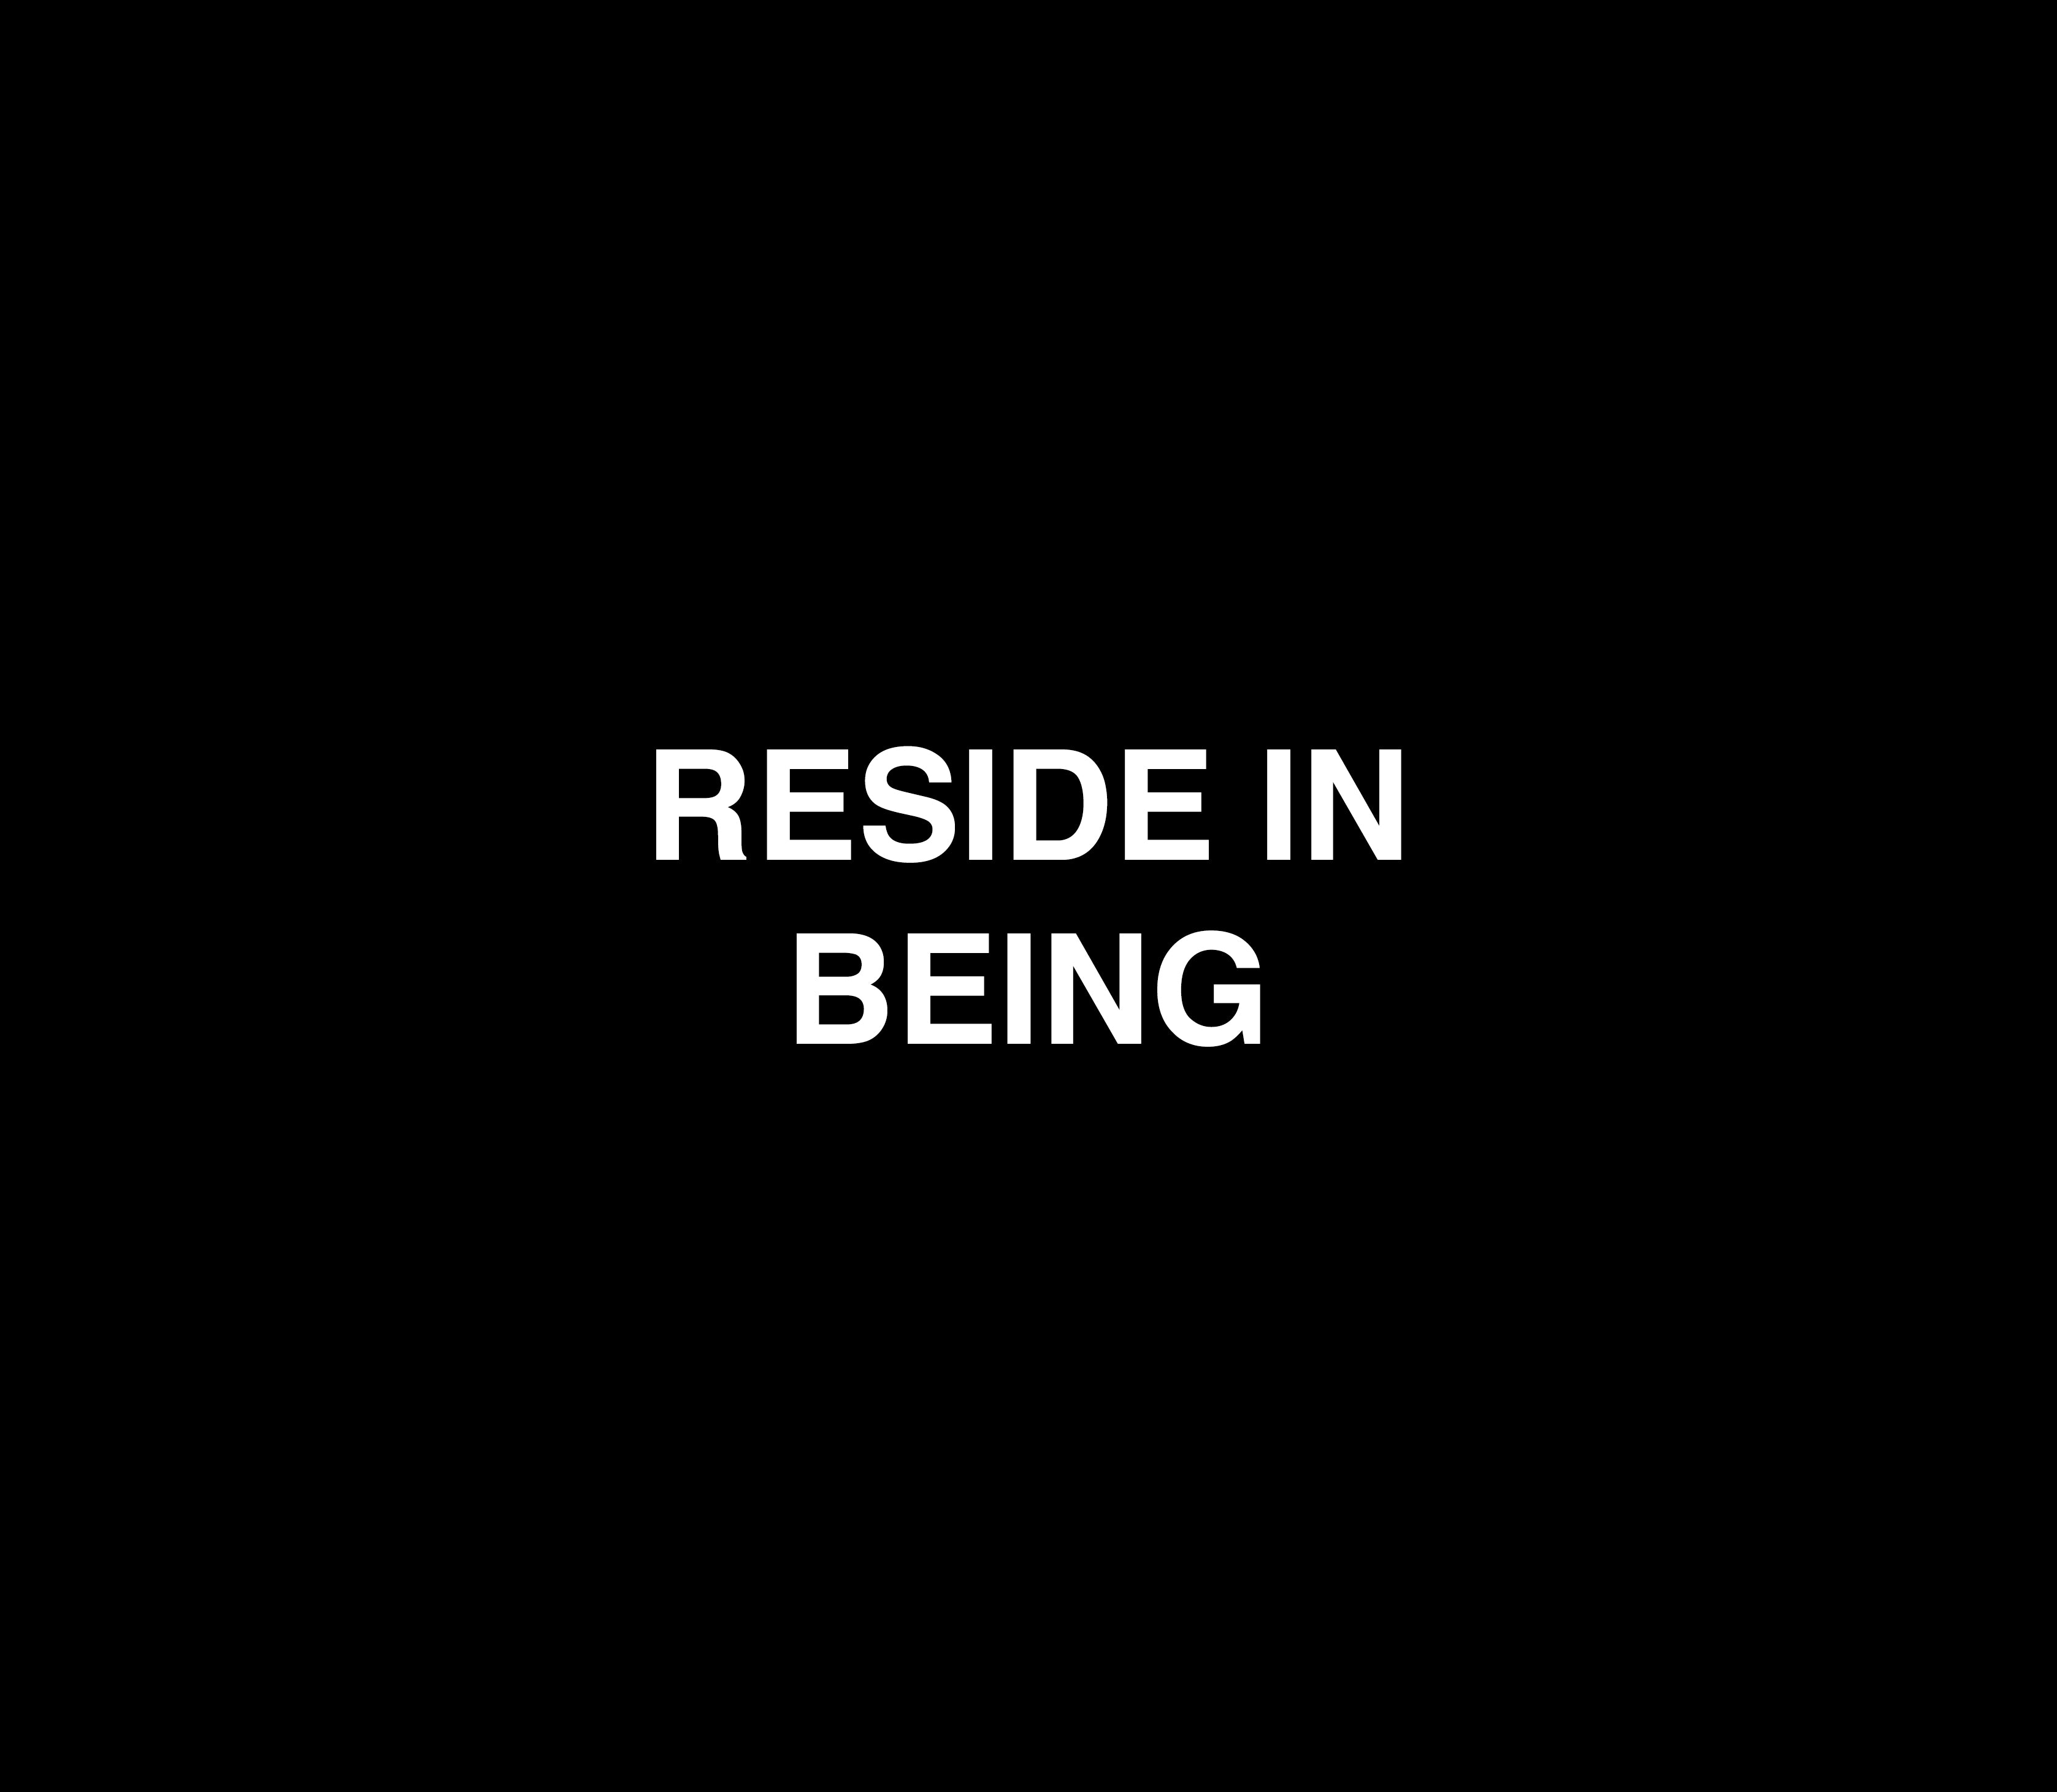 Reside in Being